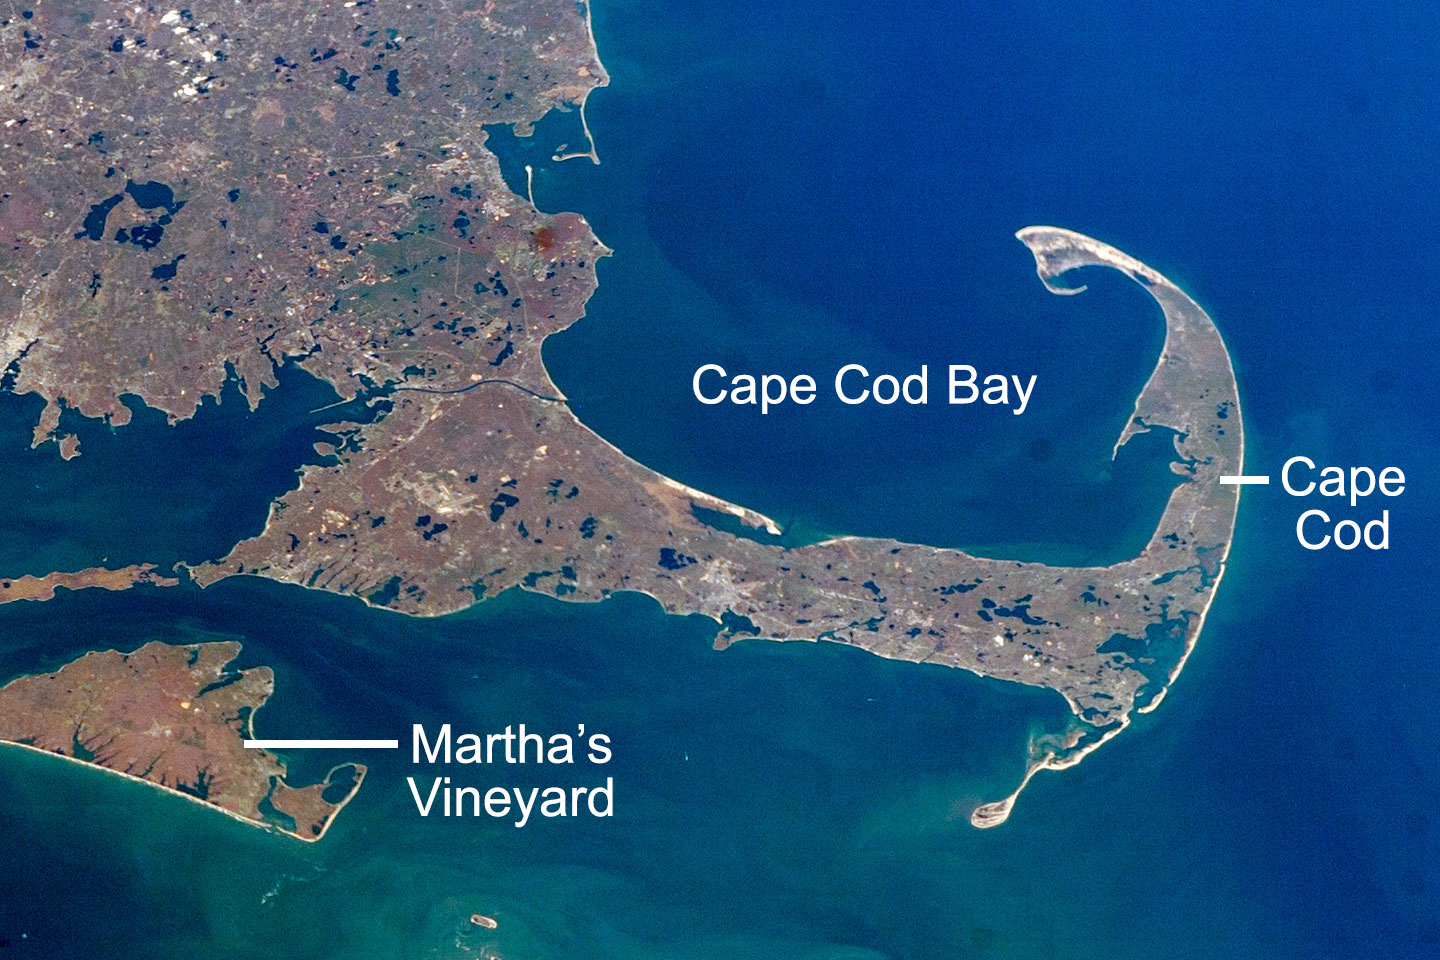 Satellite photograph of Cape Cod, Mallachusetts and Marth's Vineyard. Cape Cope extends like a backwards letter "J" from the southeastern tip of mainland Massachusetts. Martha's Vineyard is an island to its southwest; it is only partially visible in the photo. Cape Cod and mainland eastern Massachusetts have numerous kettle lakes, which can be seen in the image. Cape Cod, Cape Cod Bay, and Martha's Vineyard are labeled.